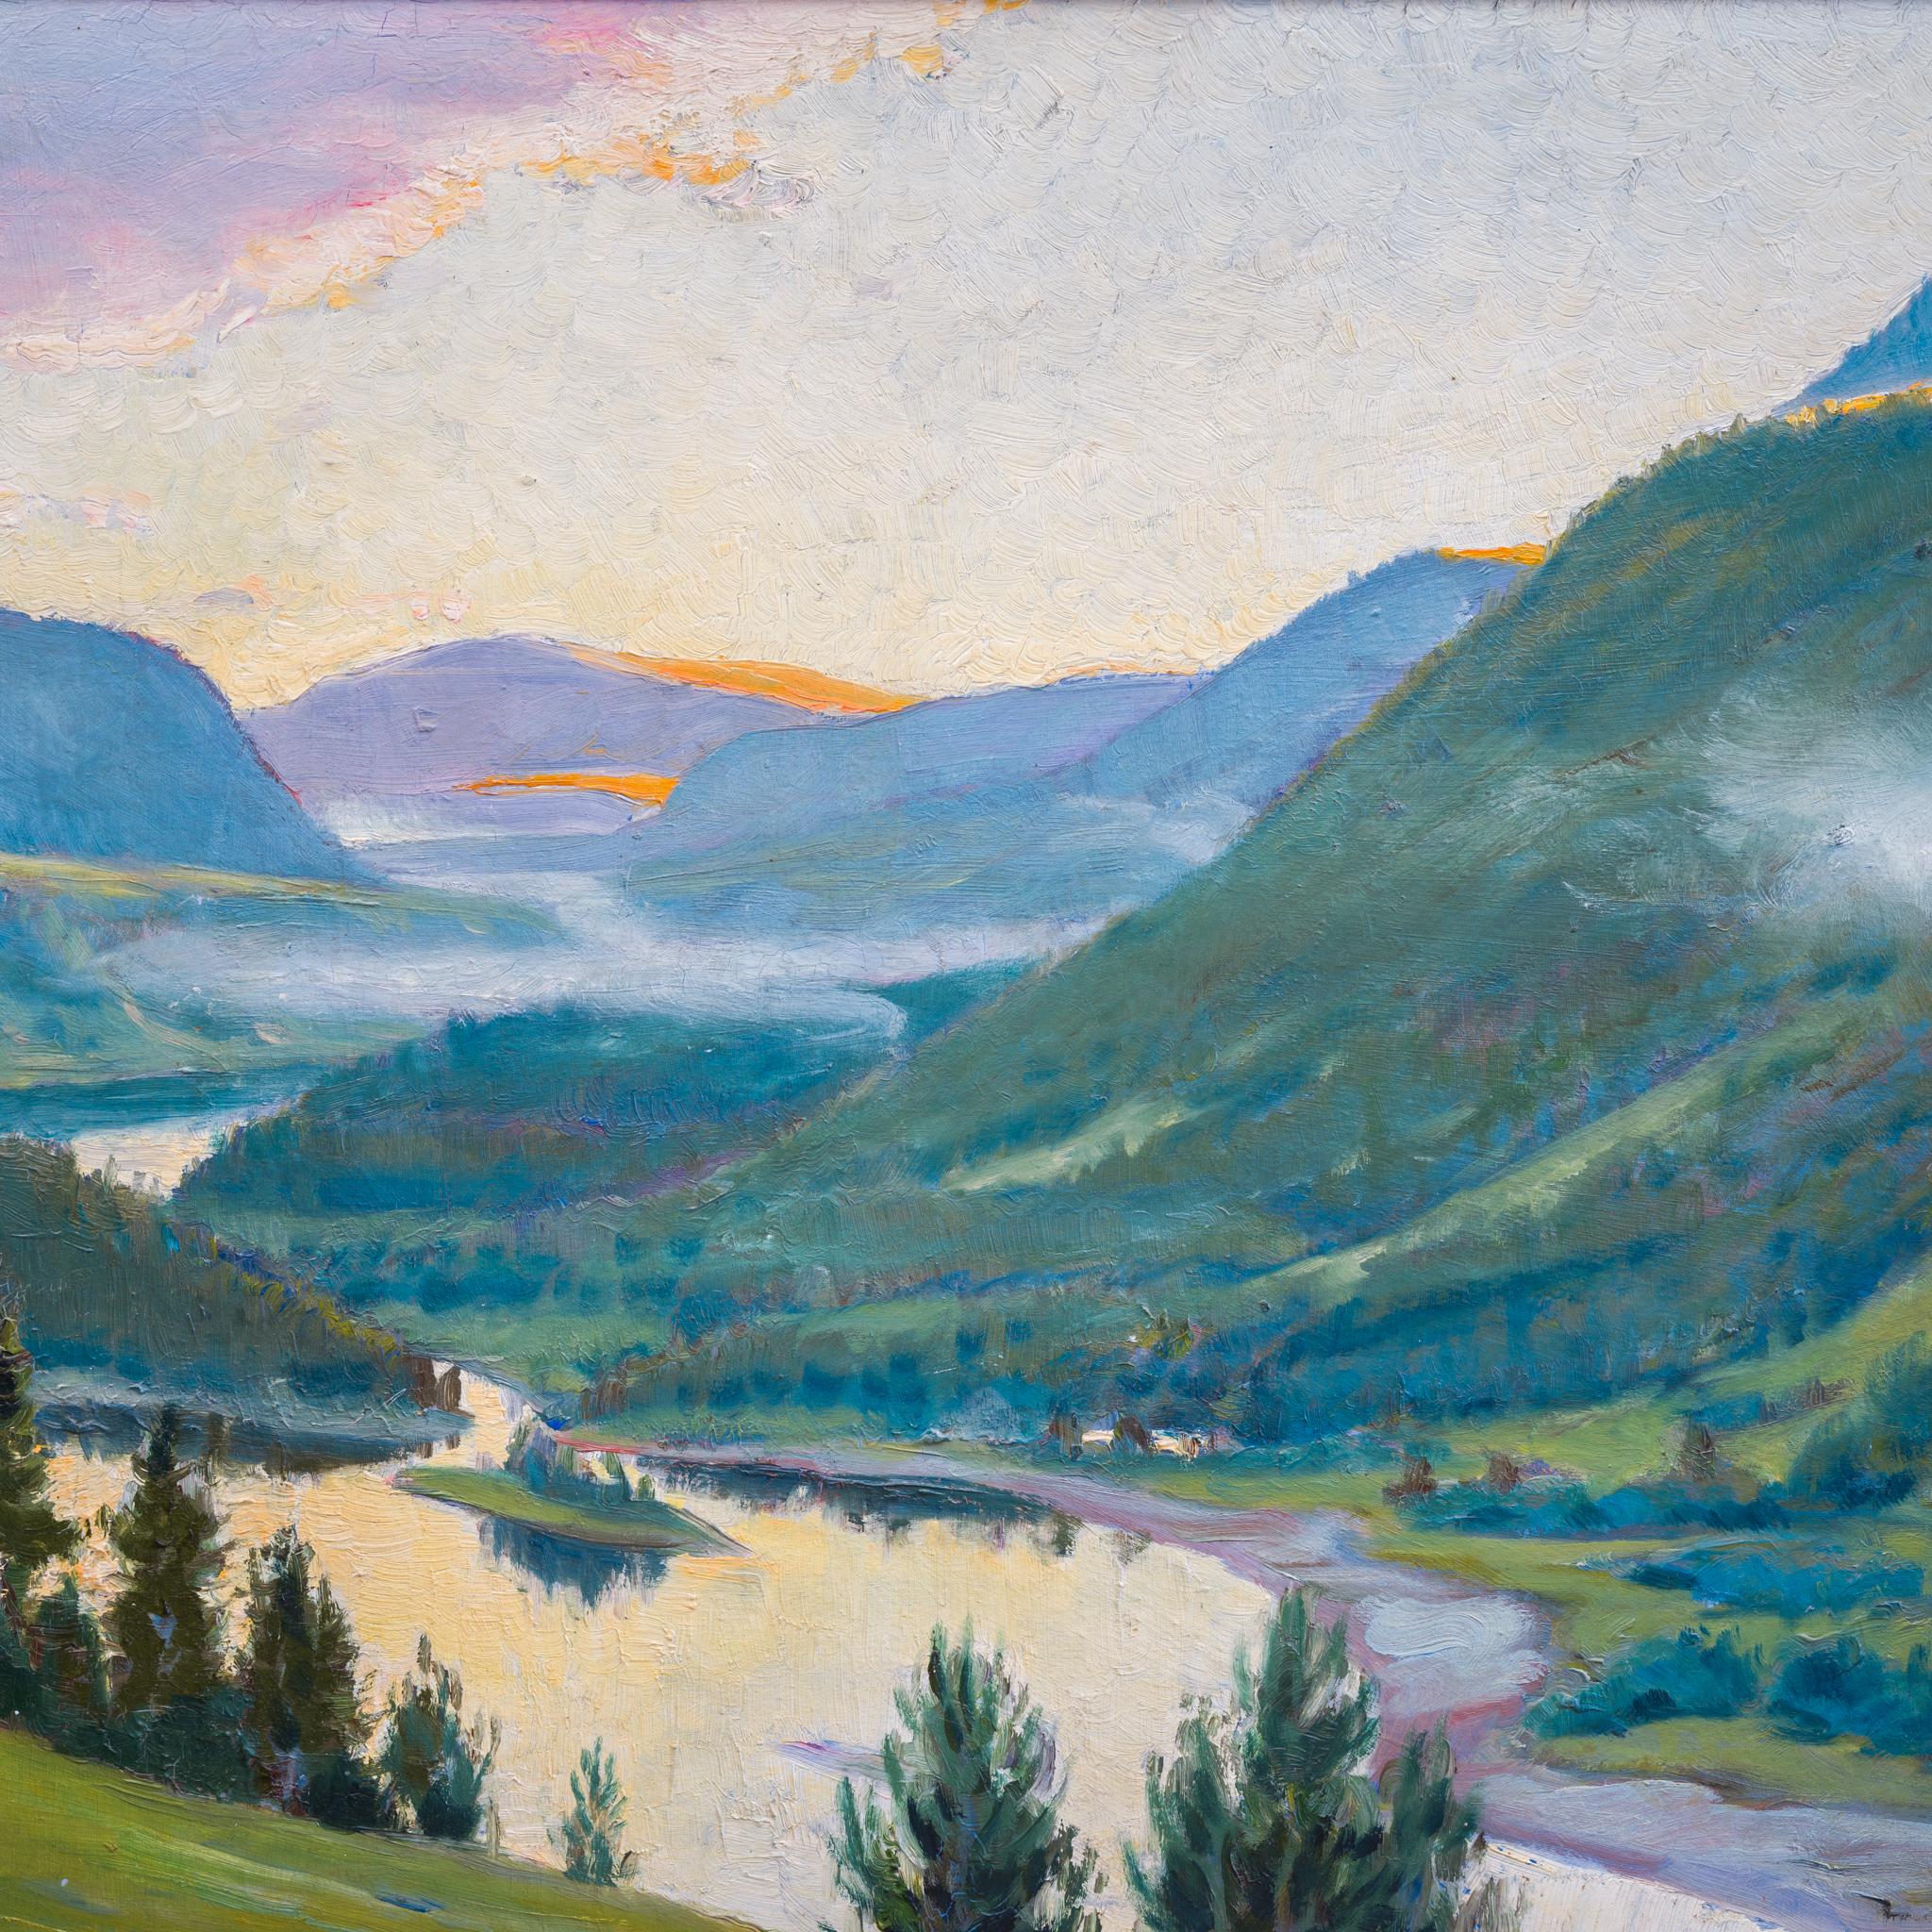 Step into a world of bygone beauty, captured exquisitely by the masterful hand of Karl Tirén (1869-1955), in this evocative landscape titled 